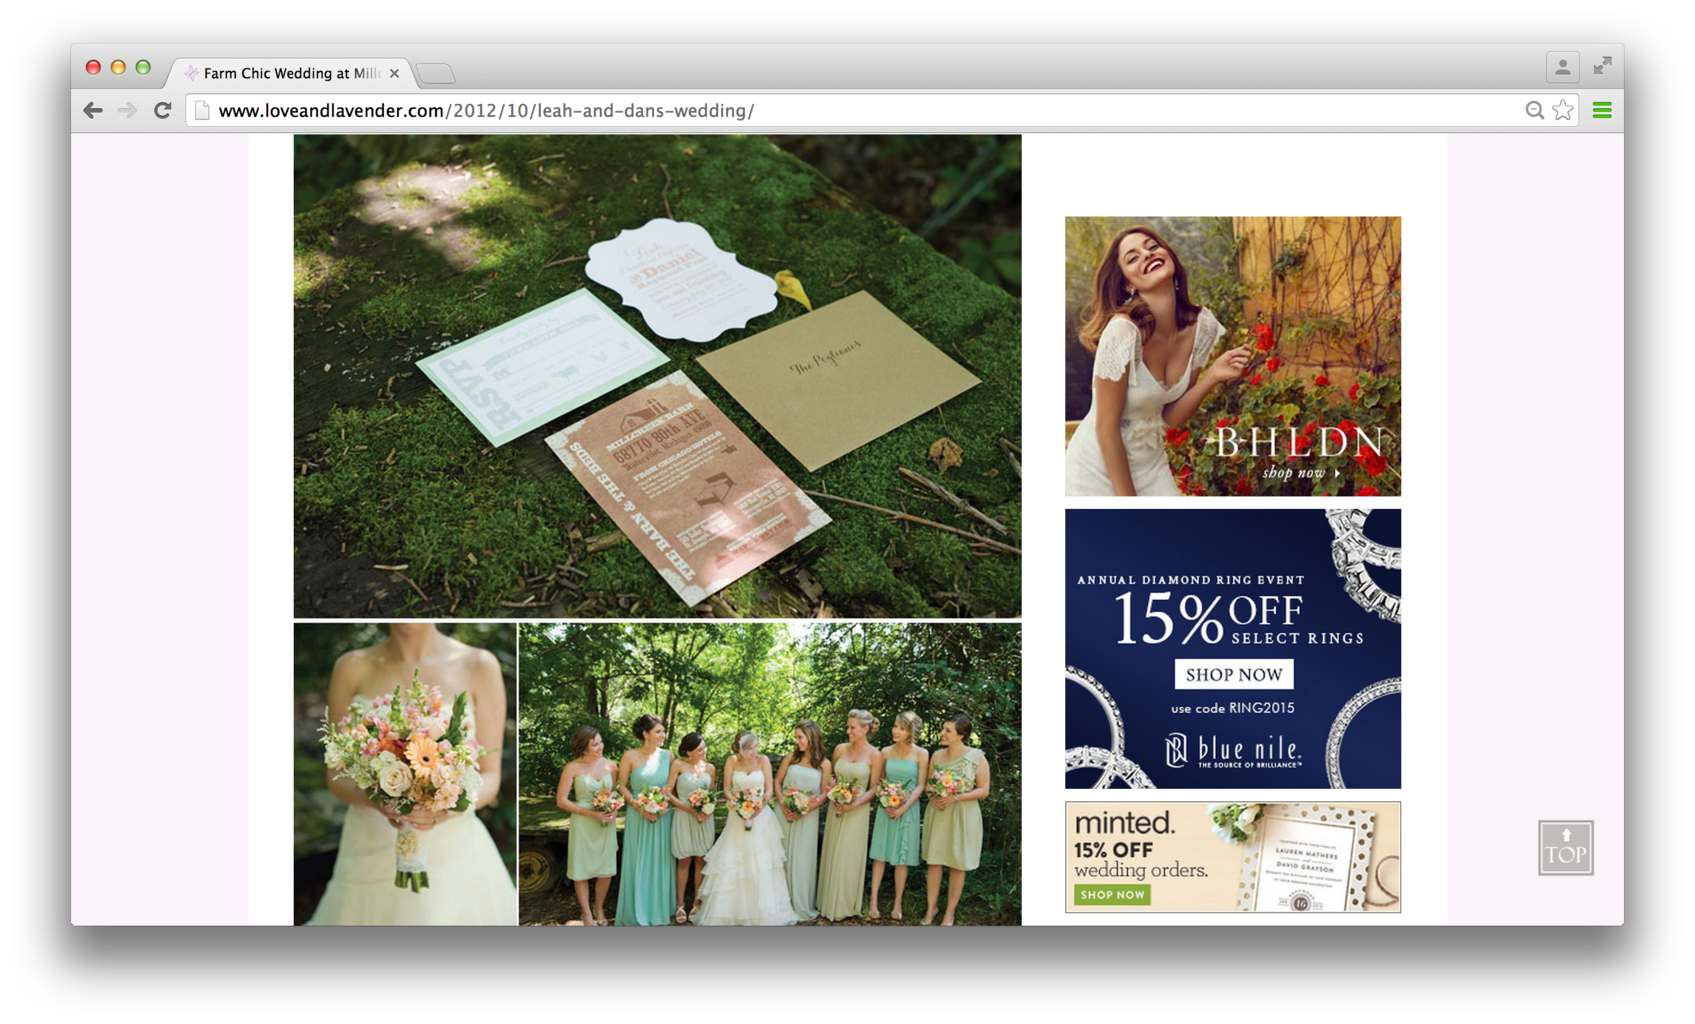 Featured on Love and Lavender, Michigan Barn Weddings